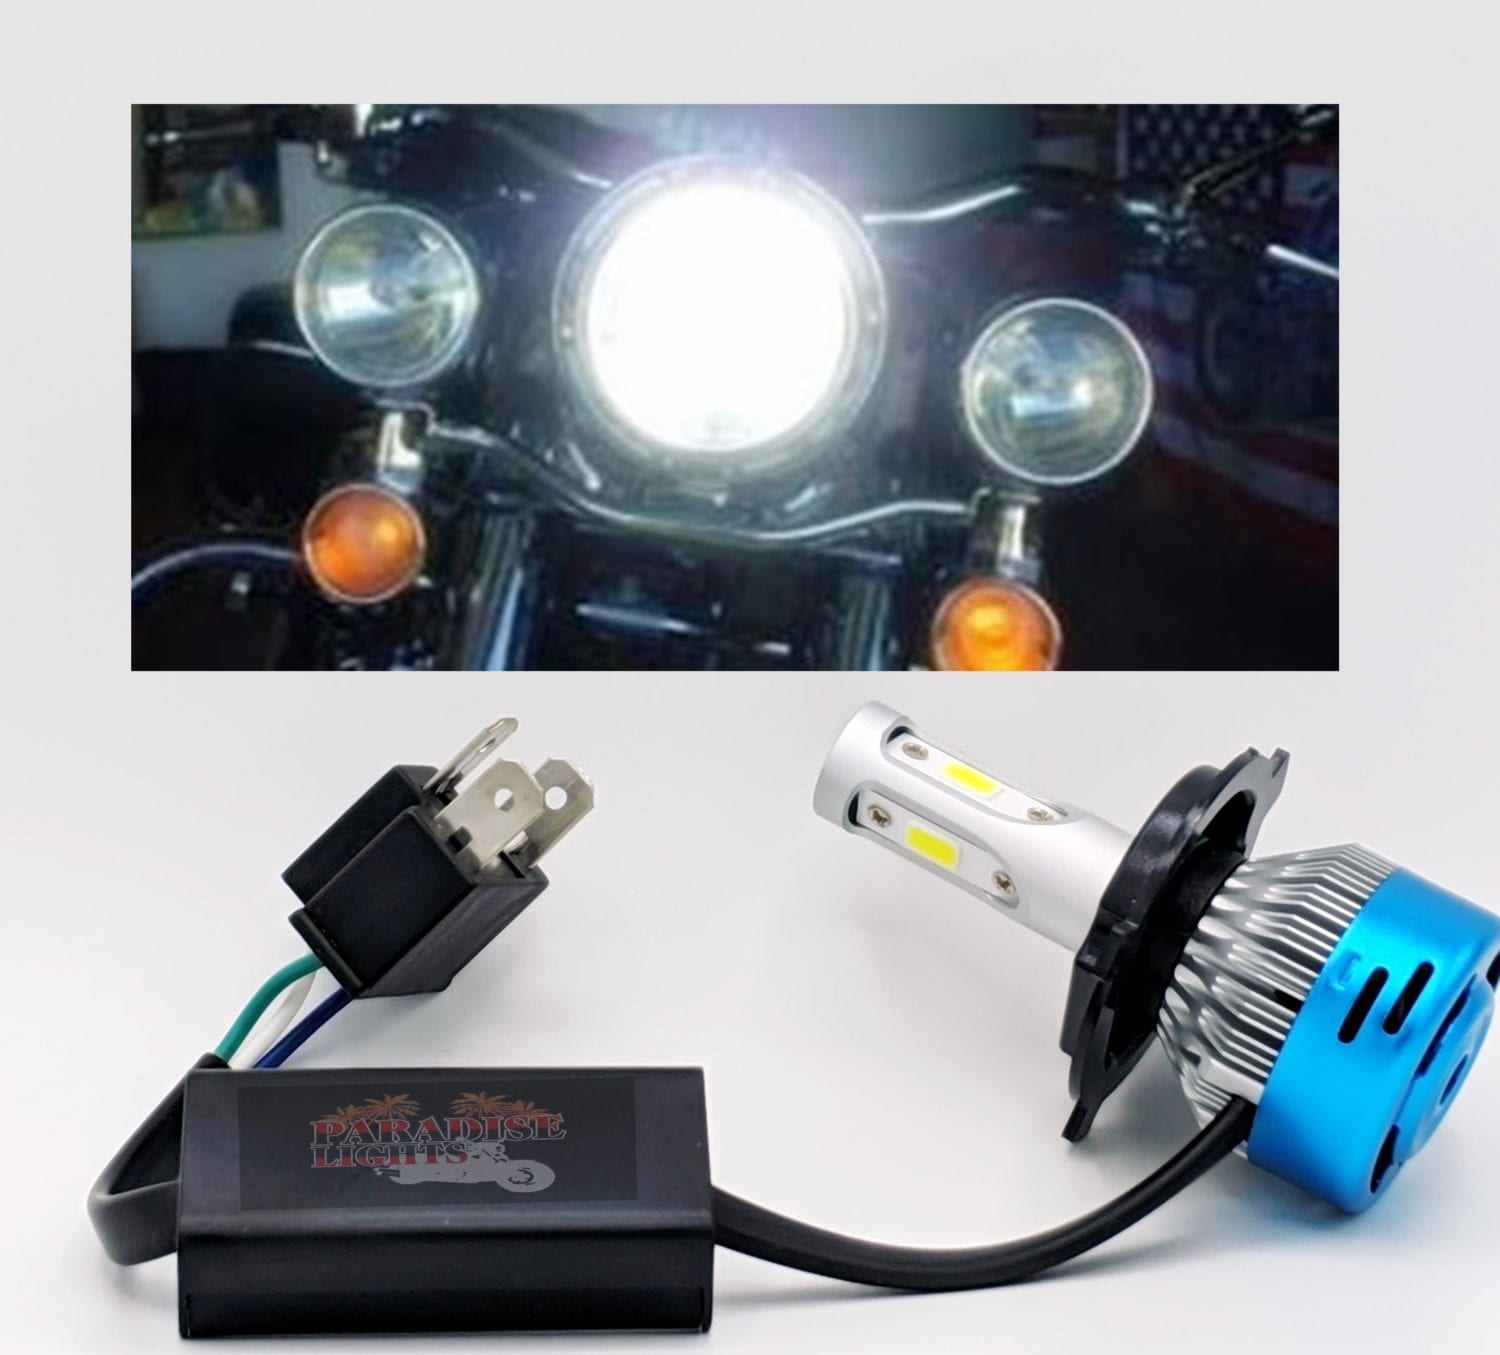 Featured image for “PL-MaX 4000 Lumen Super Bright Motorcycle H4 LED Headlight Bulb”